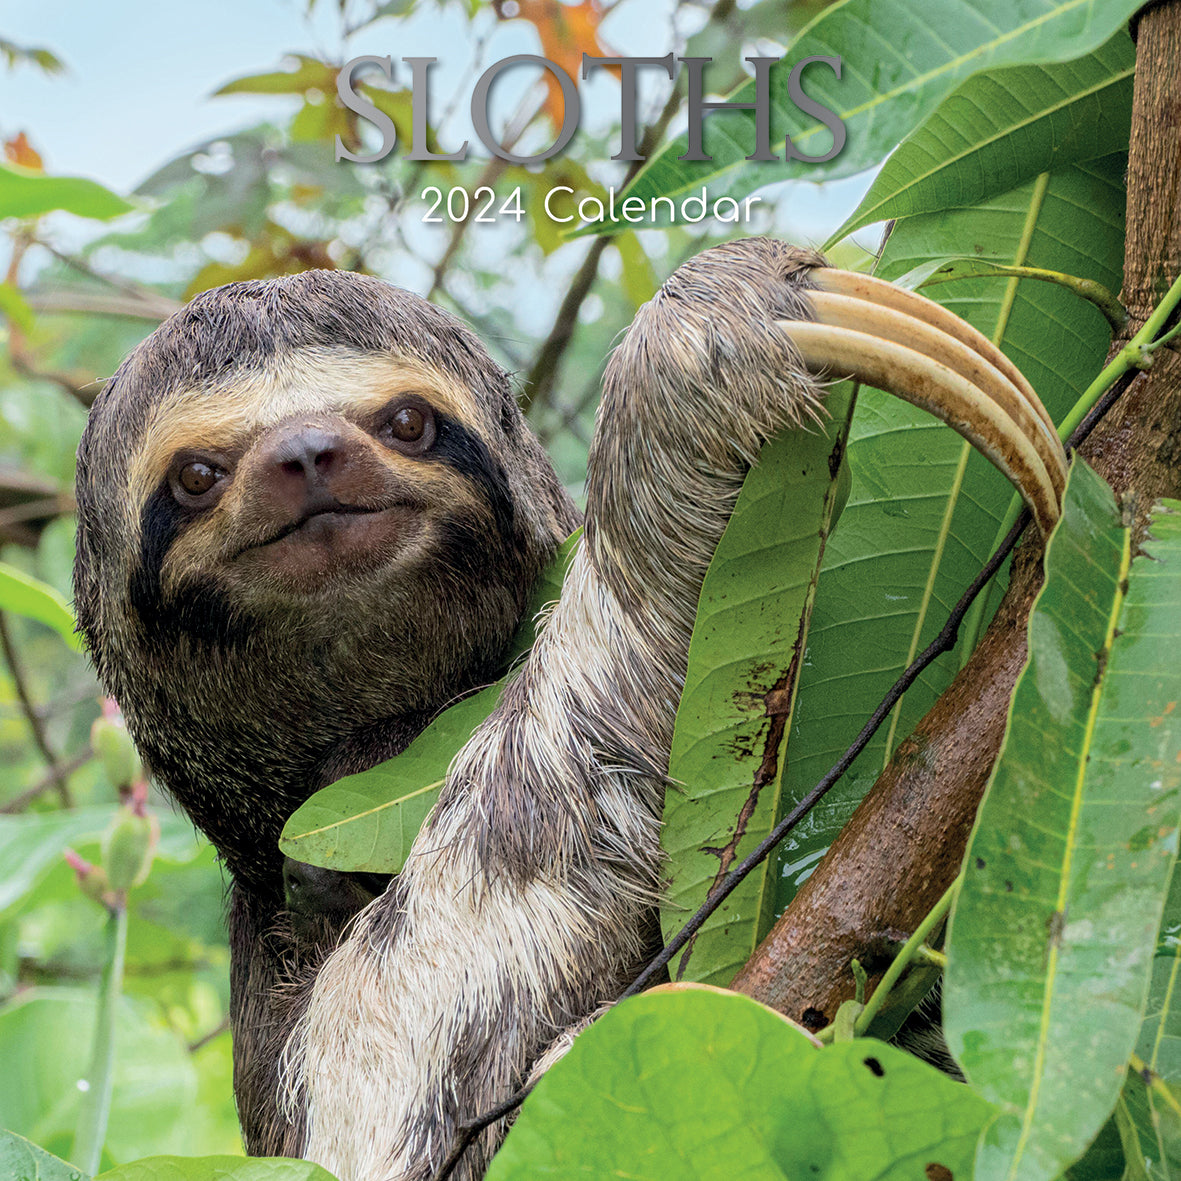 Sloths - 2024 Square Wall Calendar Pets Animals 16 Months New Year Gift Planner